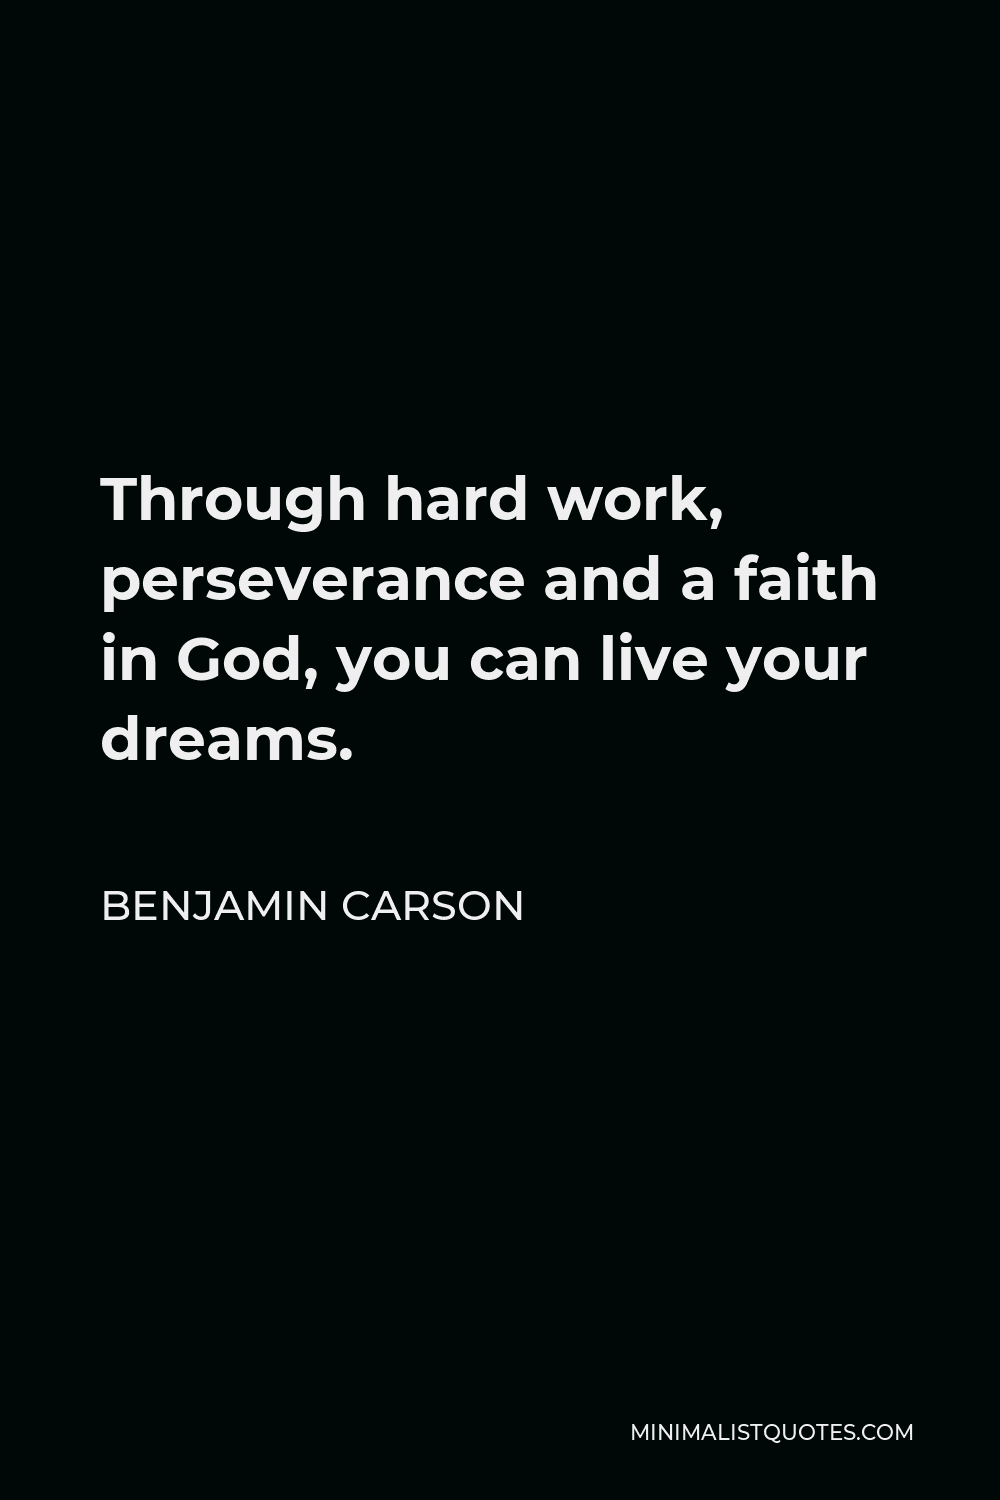 Benjamin Carson Quote - Through hard work, perseverance and a faith in God, you can live your dreams.